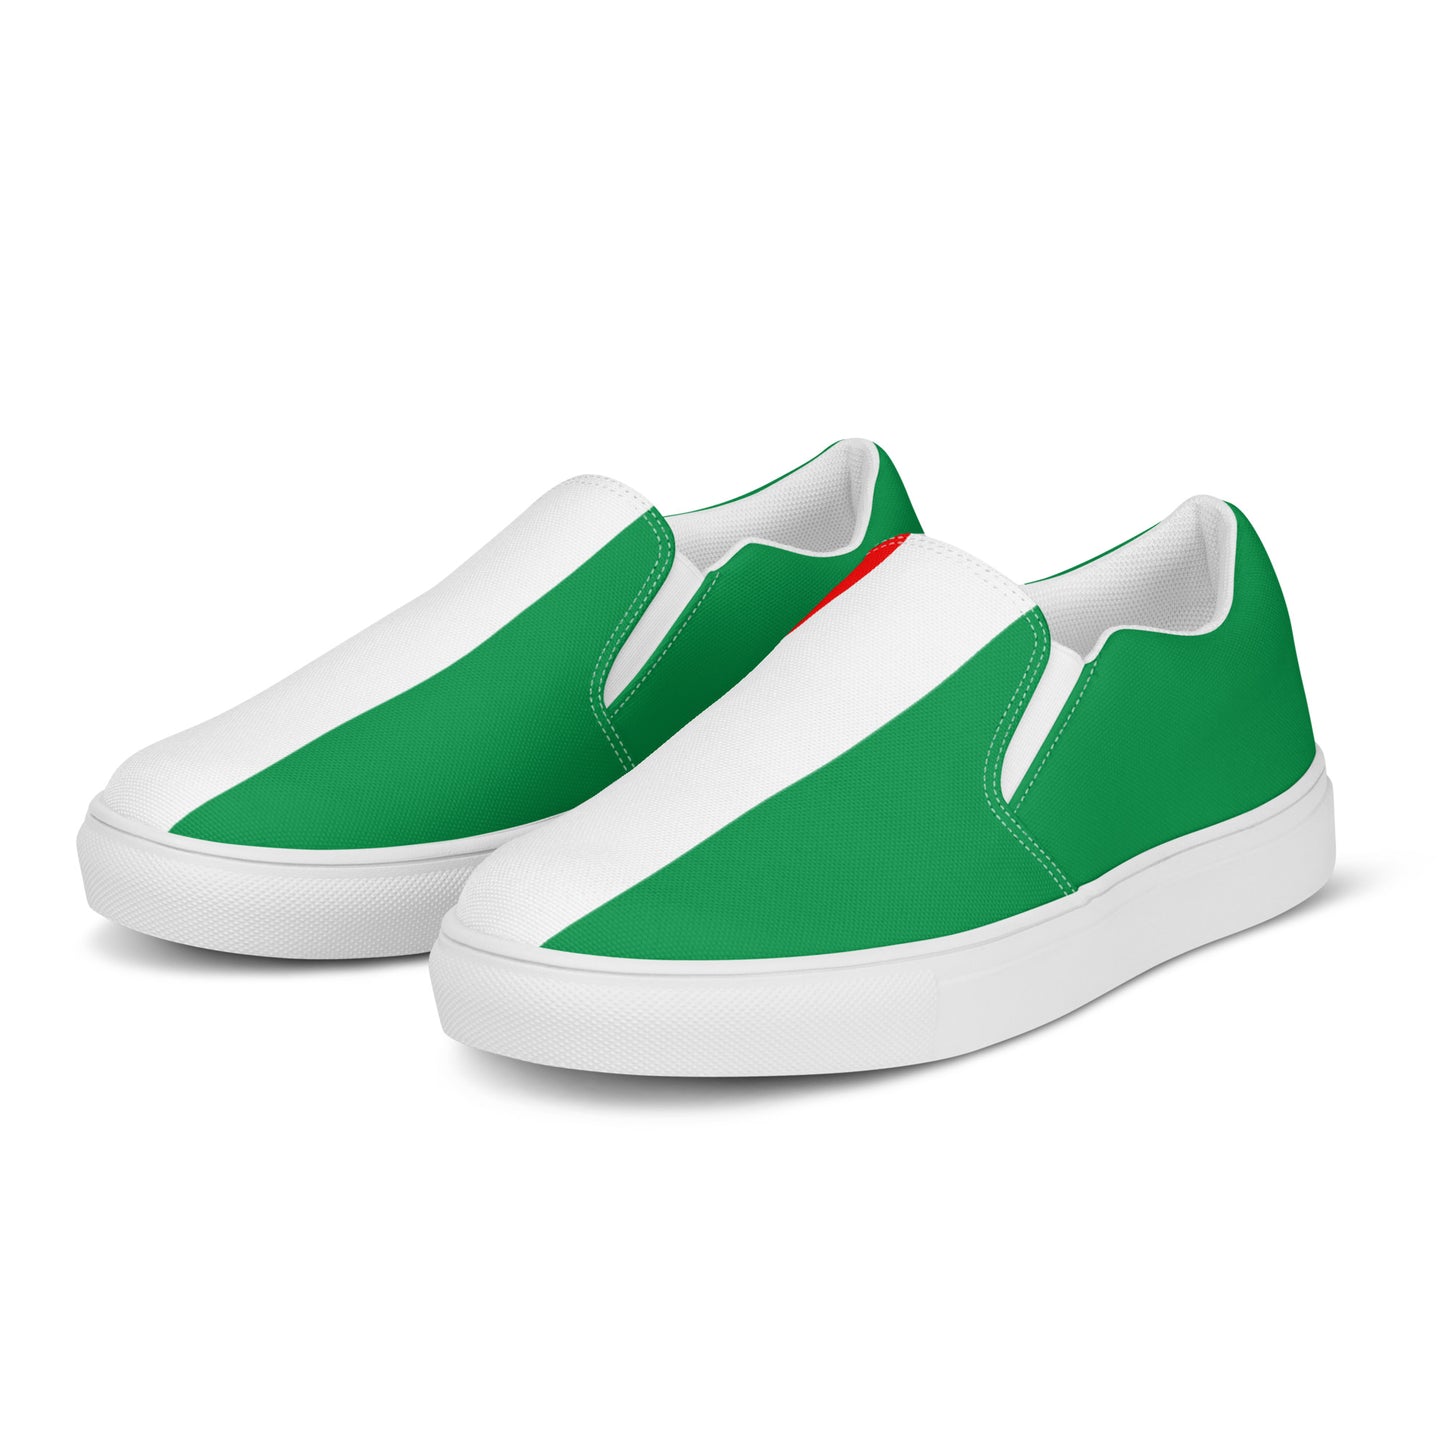 Italy Flag - Sustainably Made Women’s slip-on canvas shoes